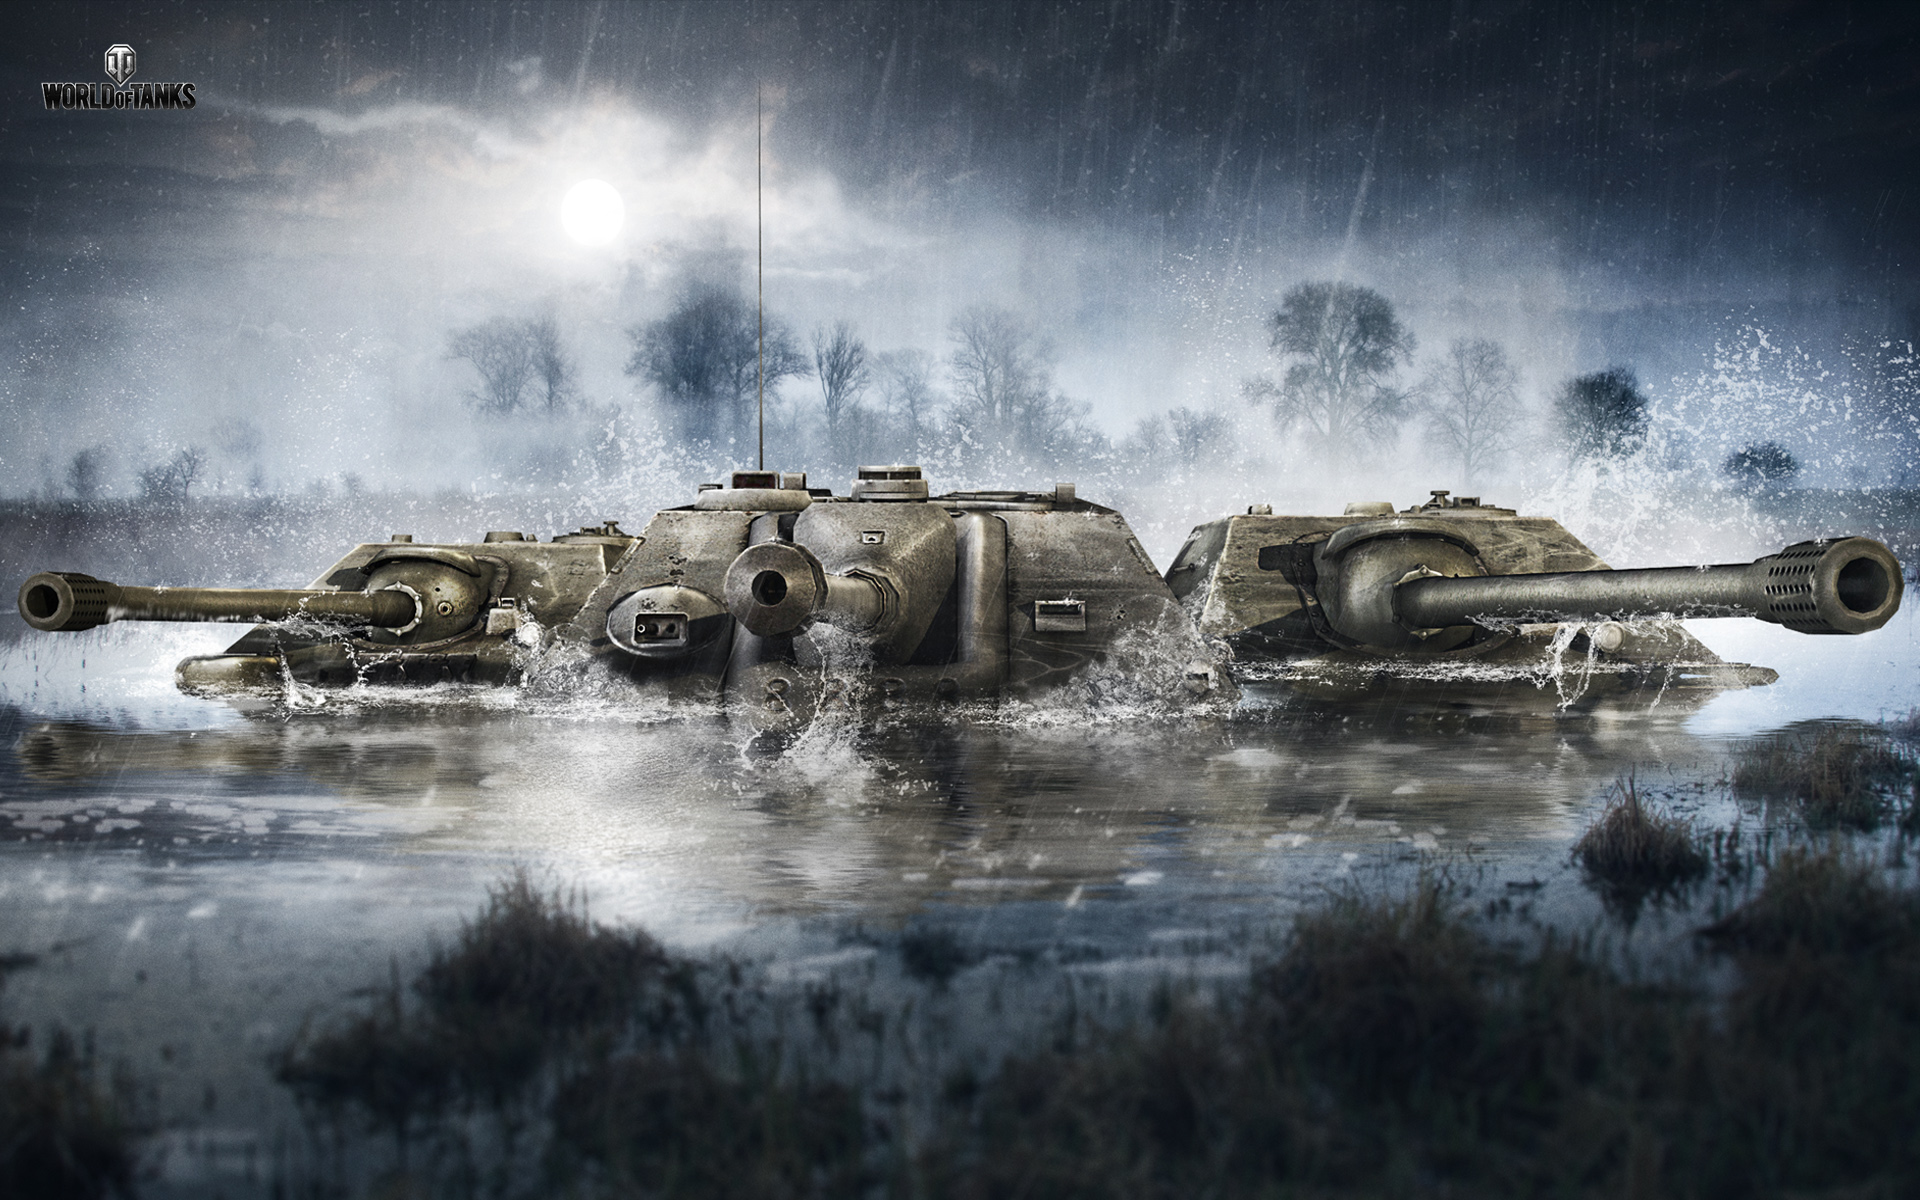 Special: Ambush. Special Offers. World of Tanks